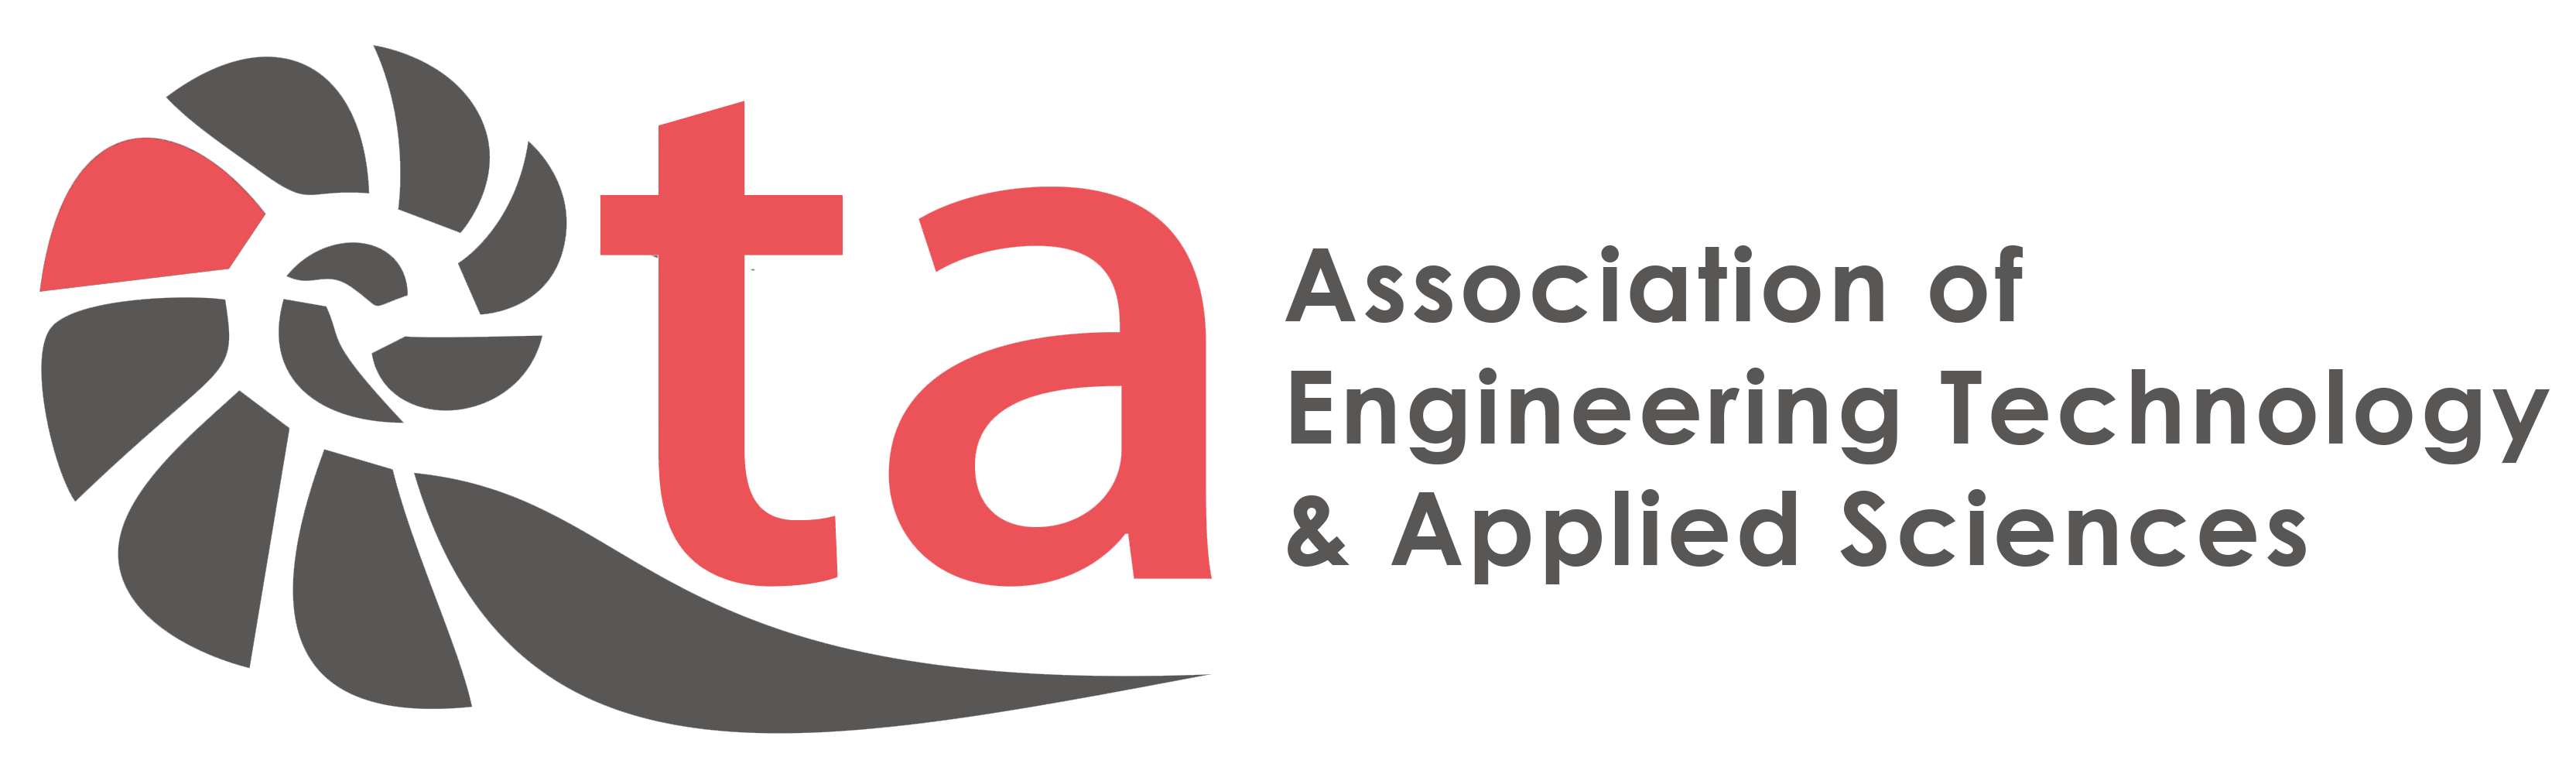 AETA International Conference on Current Issues in Engineering Management, Computer Sciences, IT, Applied Sciences & Reproduction  (ECIT)